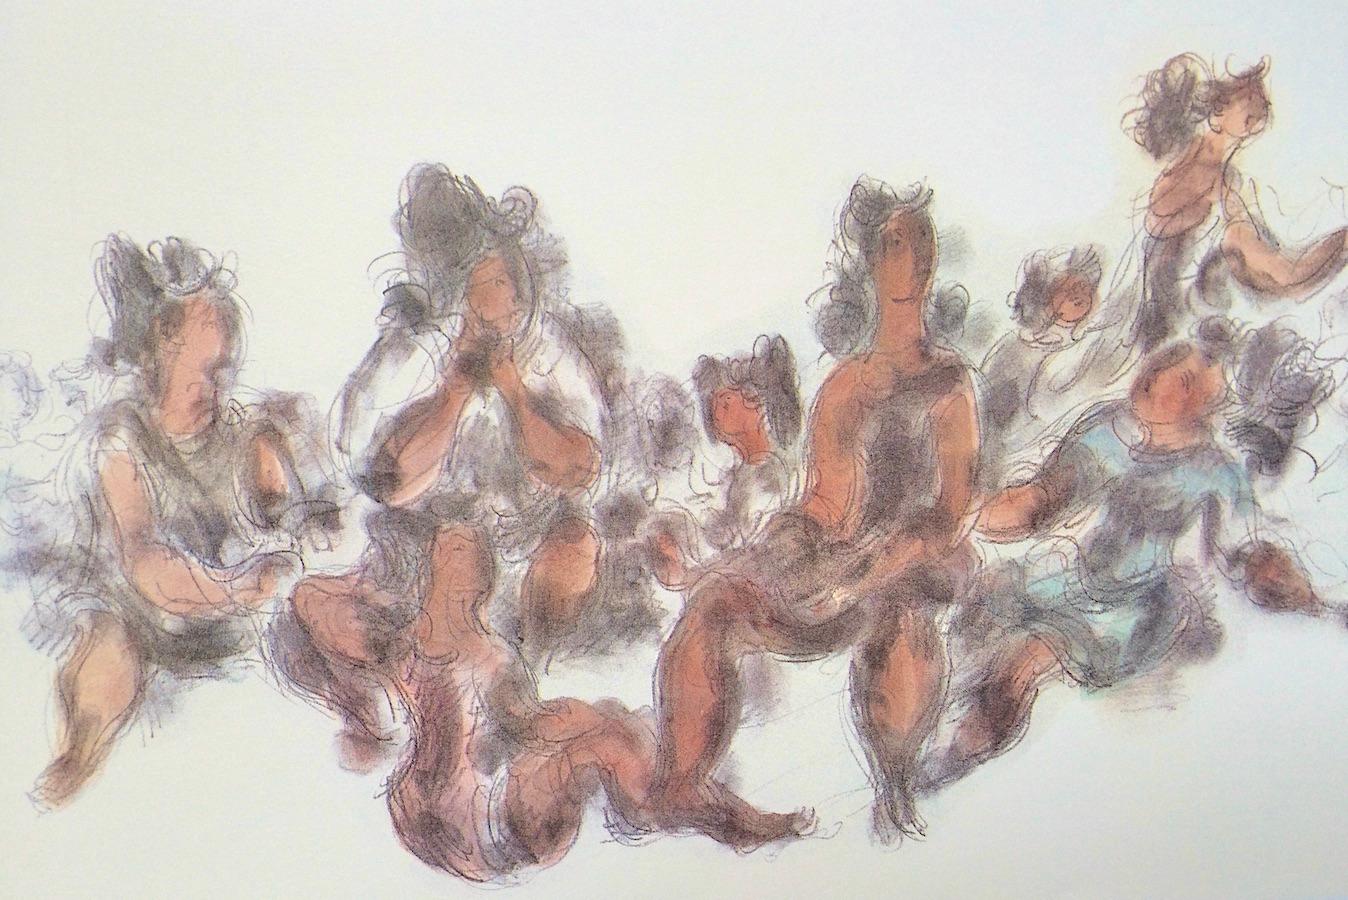 WOMEN TOGETHER Signed Lithograph Seated Female Figures, Cream, Gray, Terra Cotta - Print by Chaim Gross